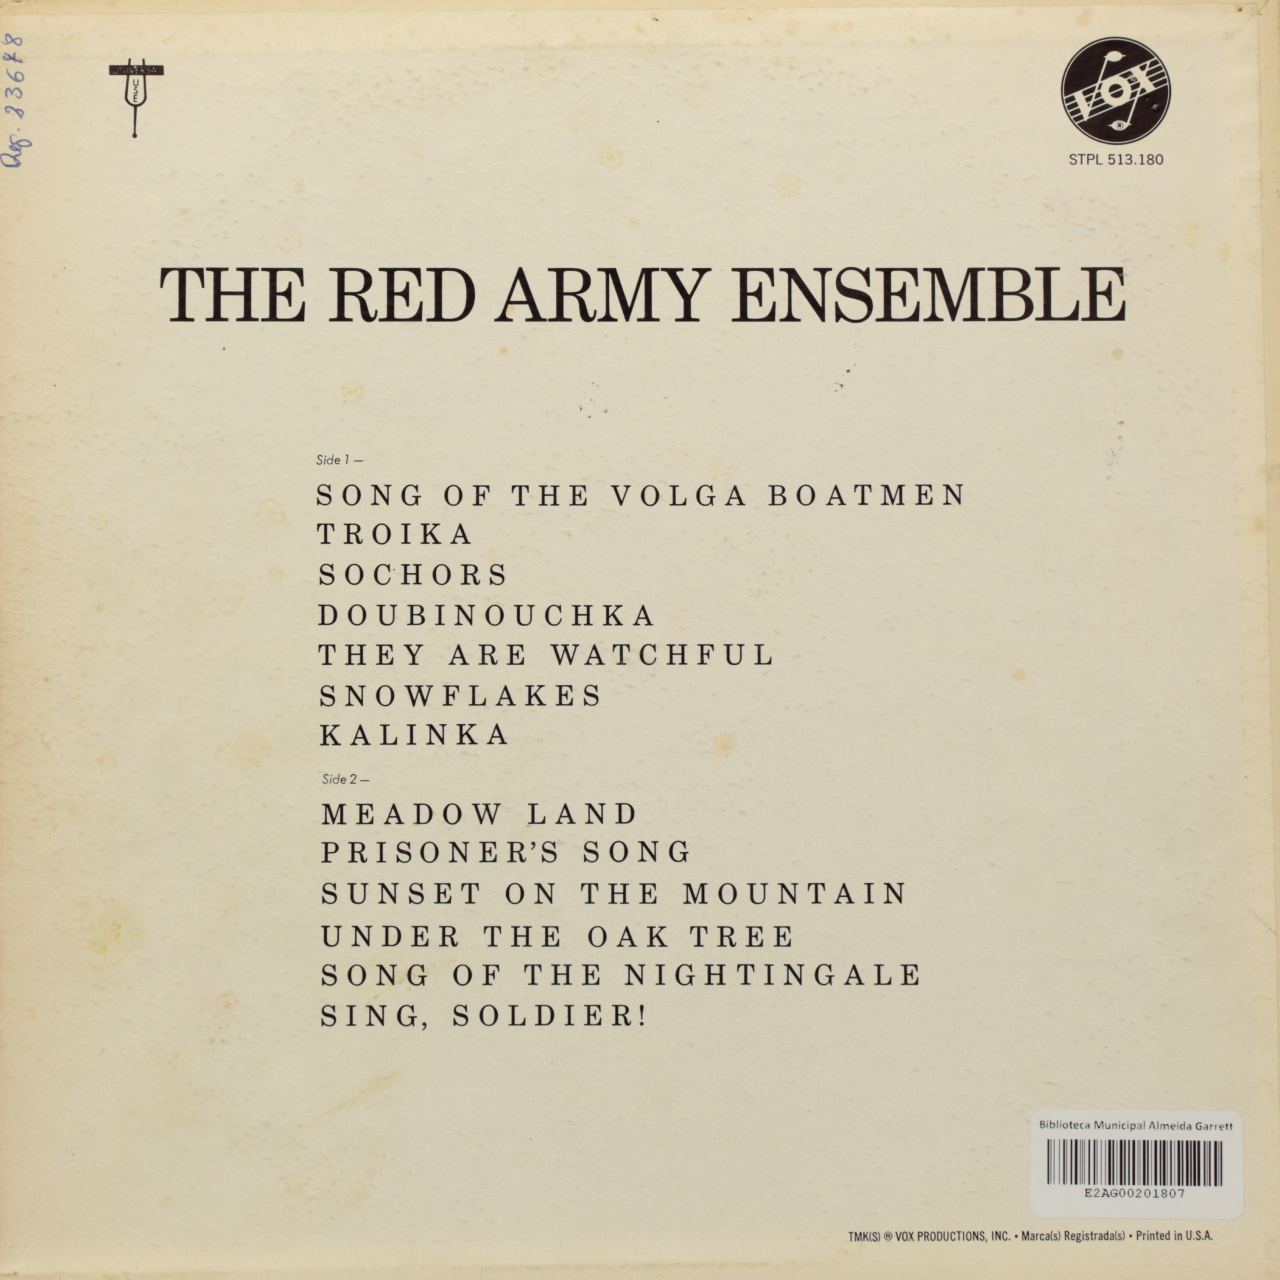 The Red Army Ensemble